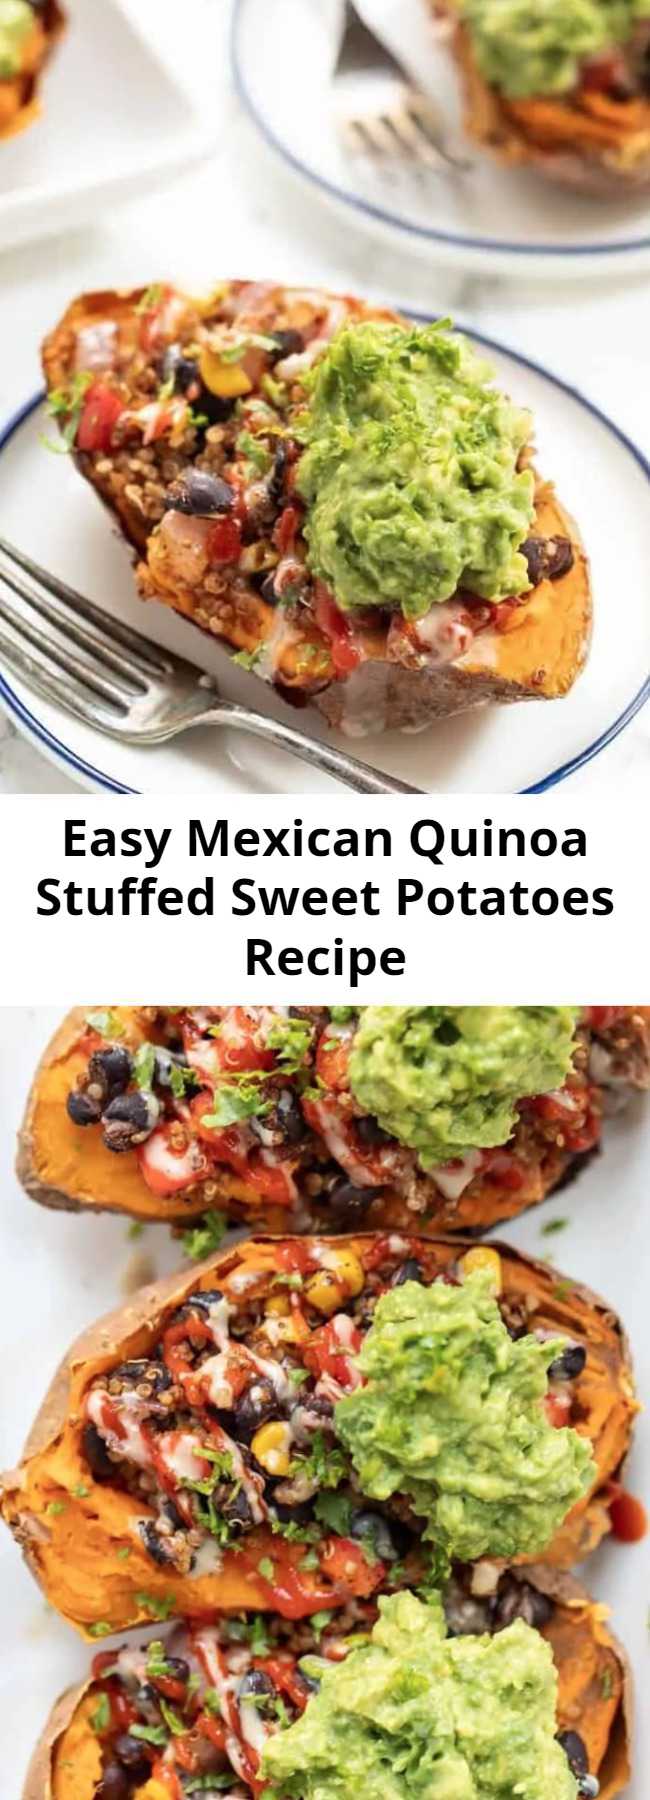 Easy Mexican Quinoa Stuffed Sweet Potatoes Recipe - These Mexican Quinoa STUFFED Sweet Potatoes are the ultimate plant-based meal! Packed with fiber and protein, they're filling, tasty and easy to make! Easy, healthy and so delicious. Stuffed with black beans, quinoa, guacamole, and more healthy ingredients! #stuffedsweetpotatoes #mexicanquinoa #quinoa #quinoarecipe #vegandinner